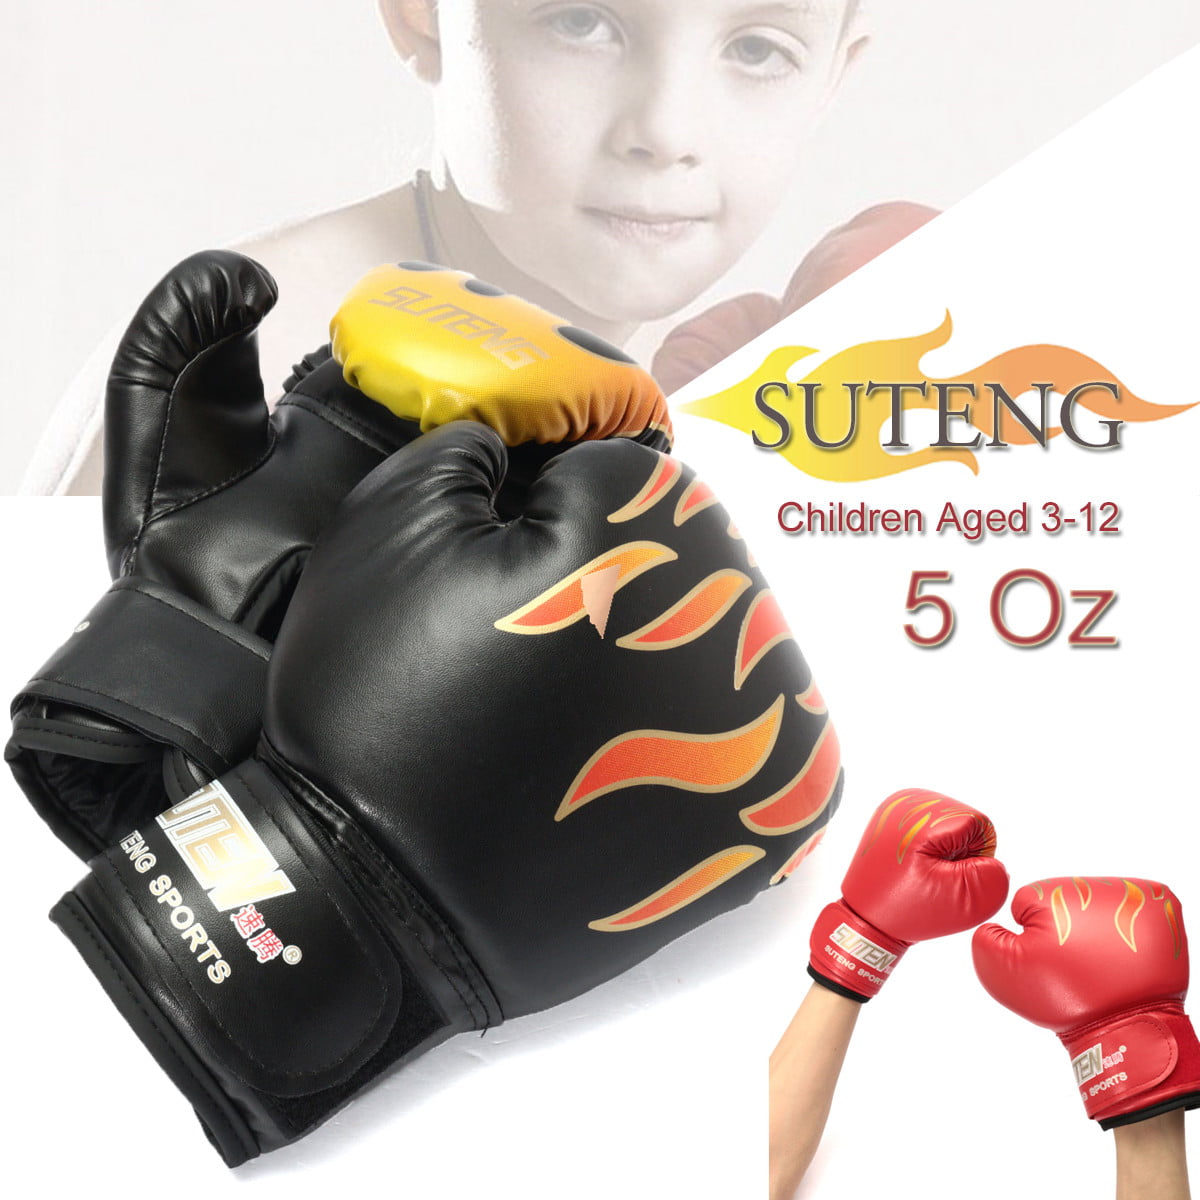 Kids Boxing Gloves Protective Punching Bag Training Gloves for Child Age 3-12 